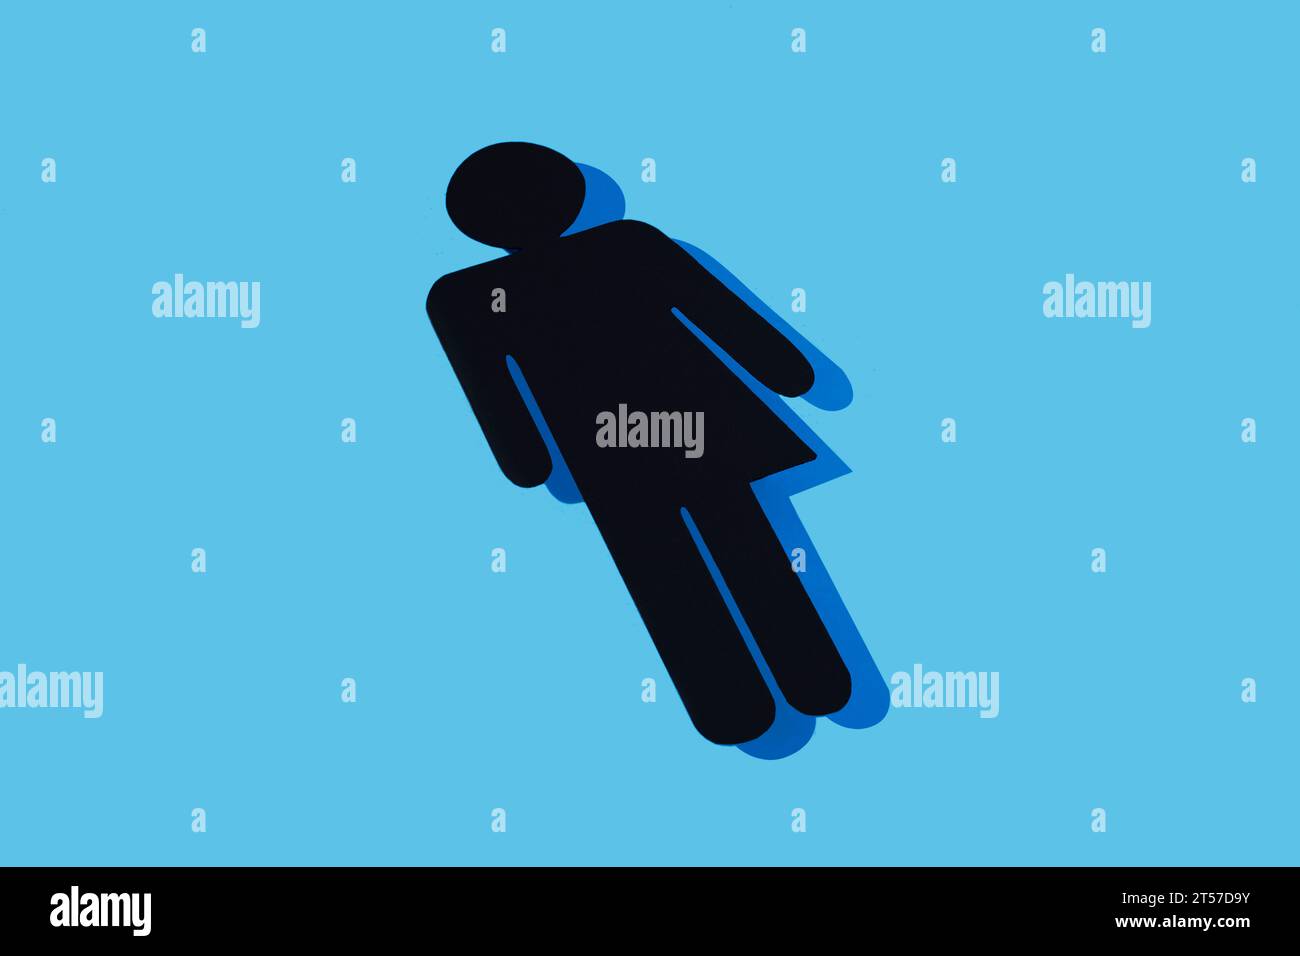 a black gender neutral icon with a dark blue shadow, on a light blue background Stock Photo